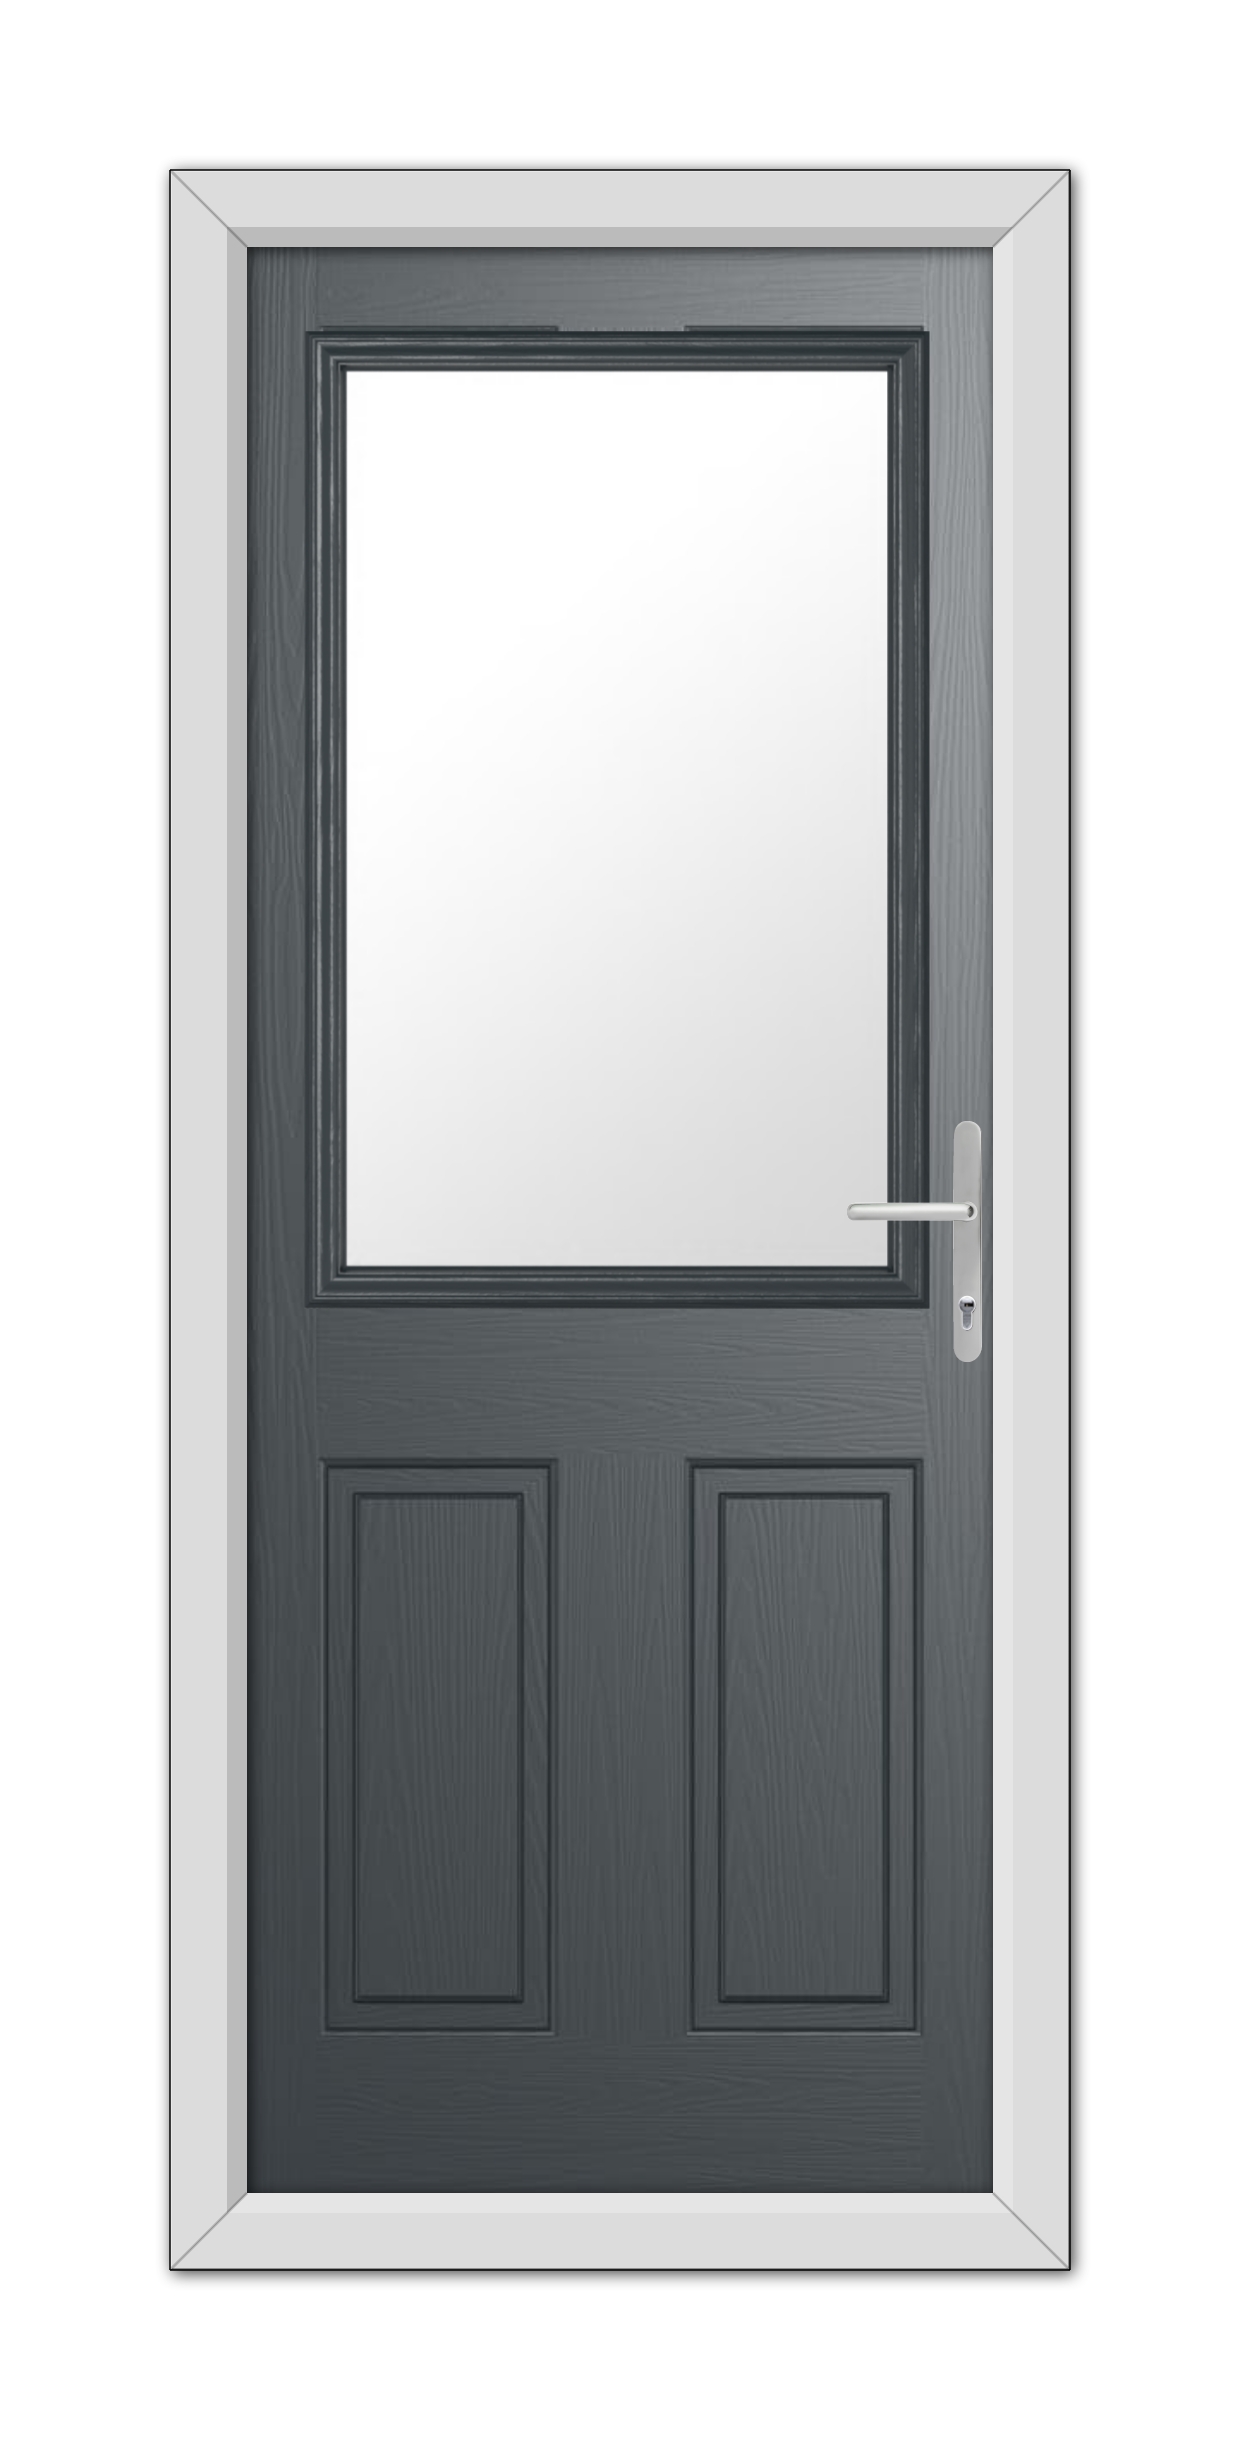 A modern Anthracite Grey Buxton Composite door with a large, central, rectangular window pane, set in a white frame, featuring a silver handle on the right side.